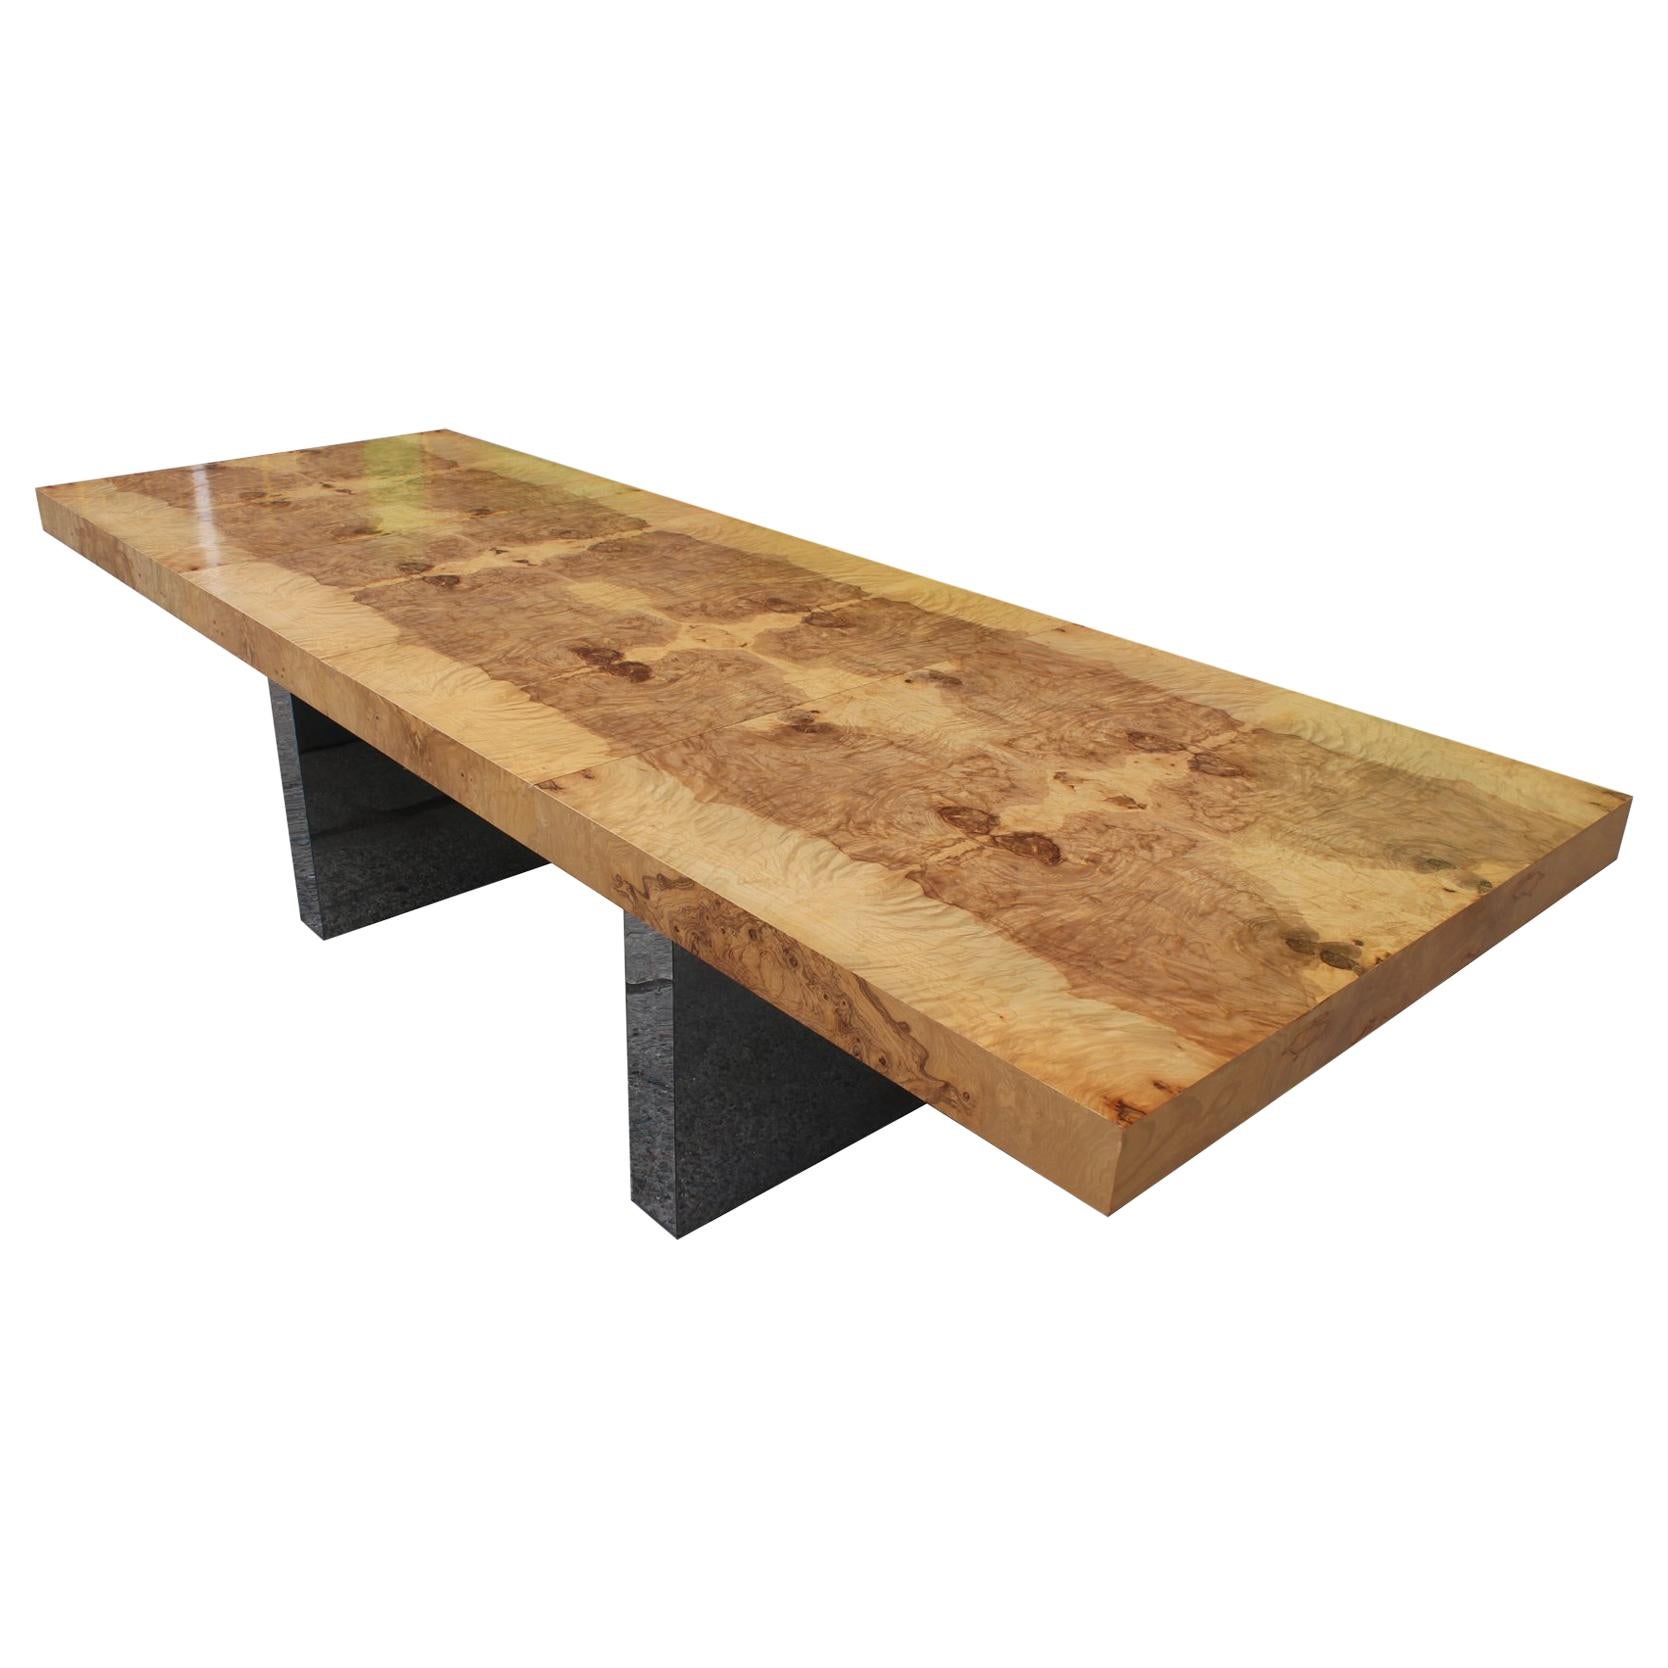 Milo Baughman Extendable Dining Table in Burl and Chrome